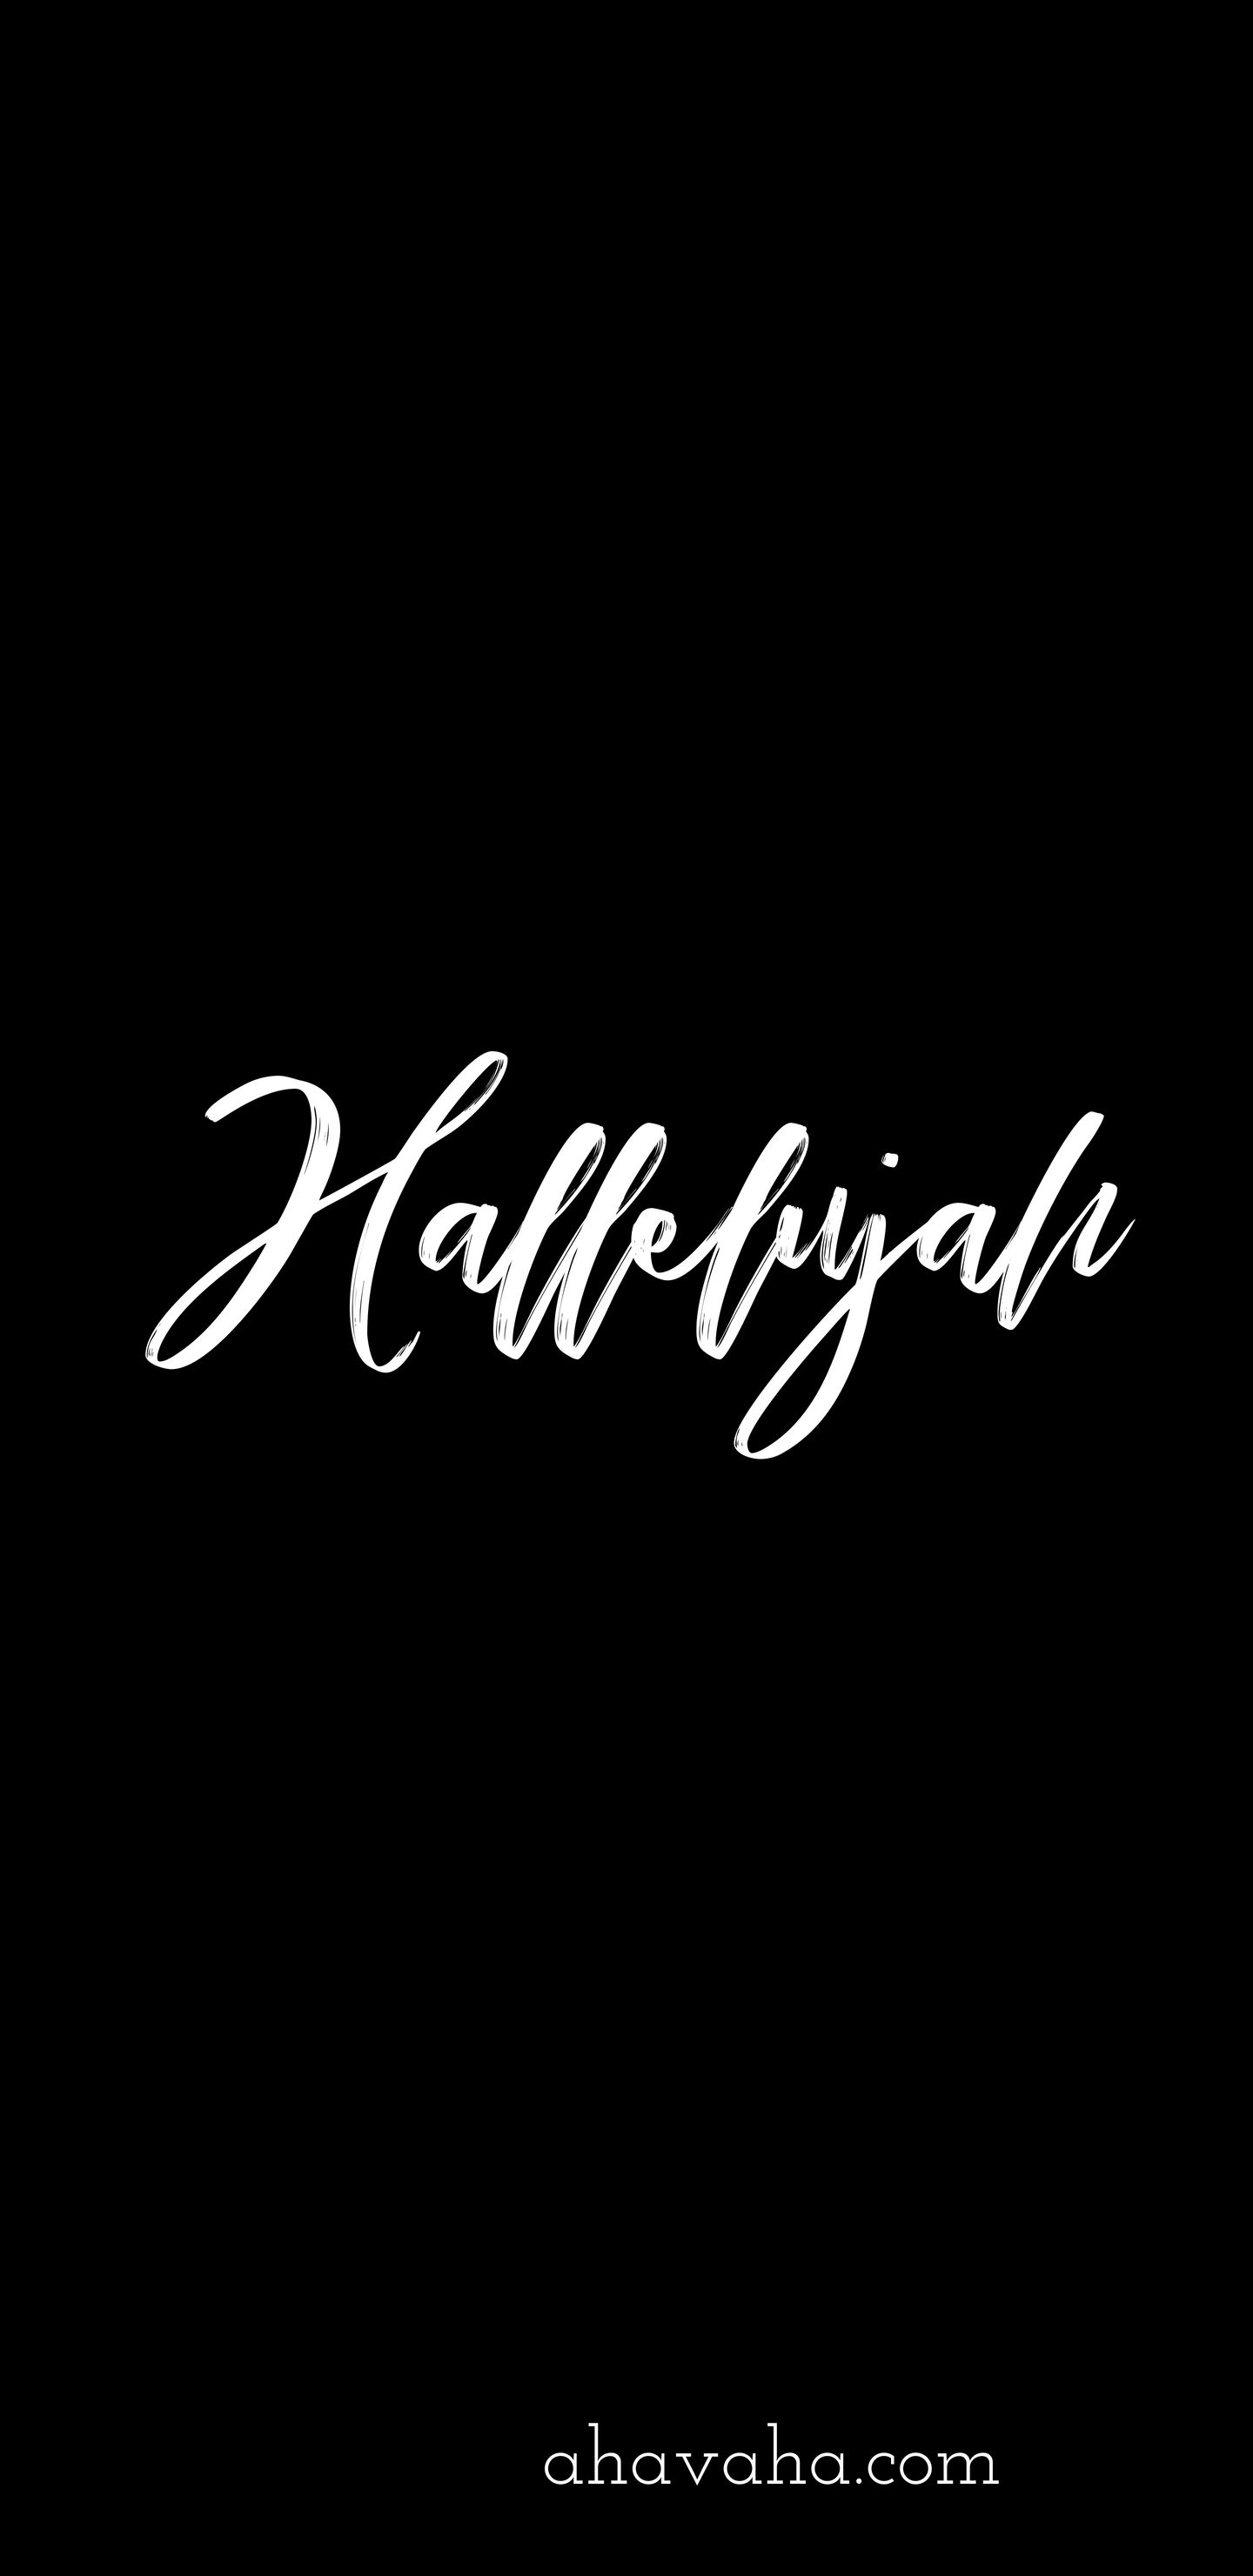 Hallelujah Themed Free Christian Wallpaper and Screensaver Mobile Phone Black Background 1